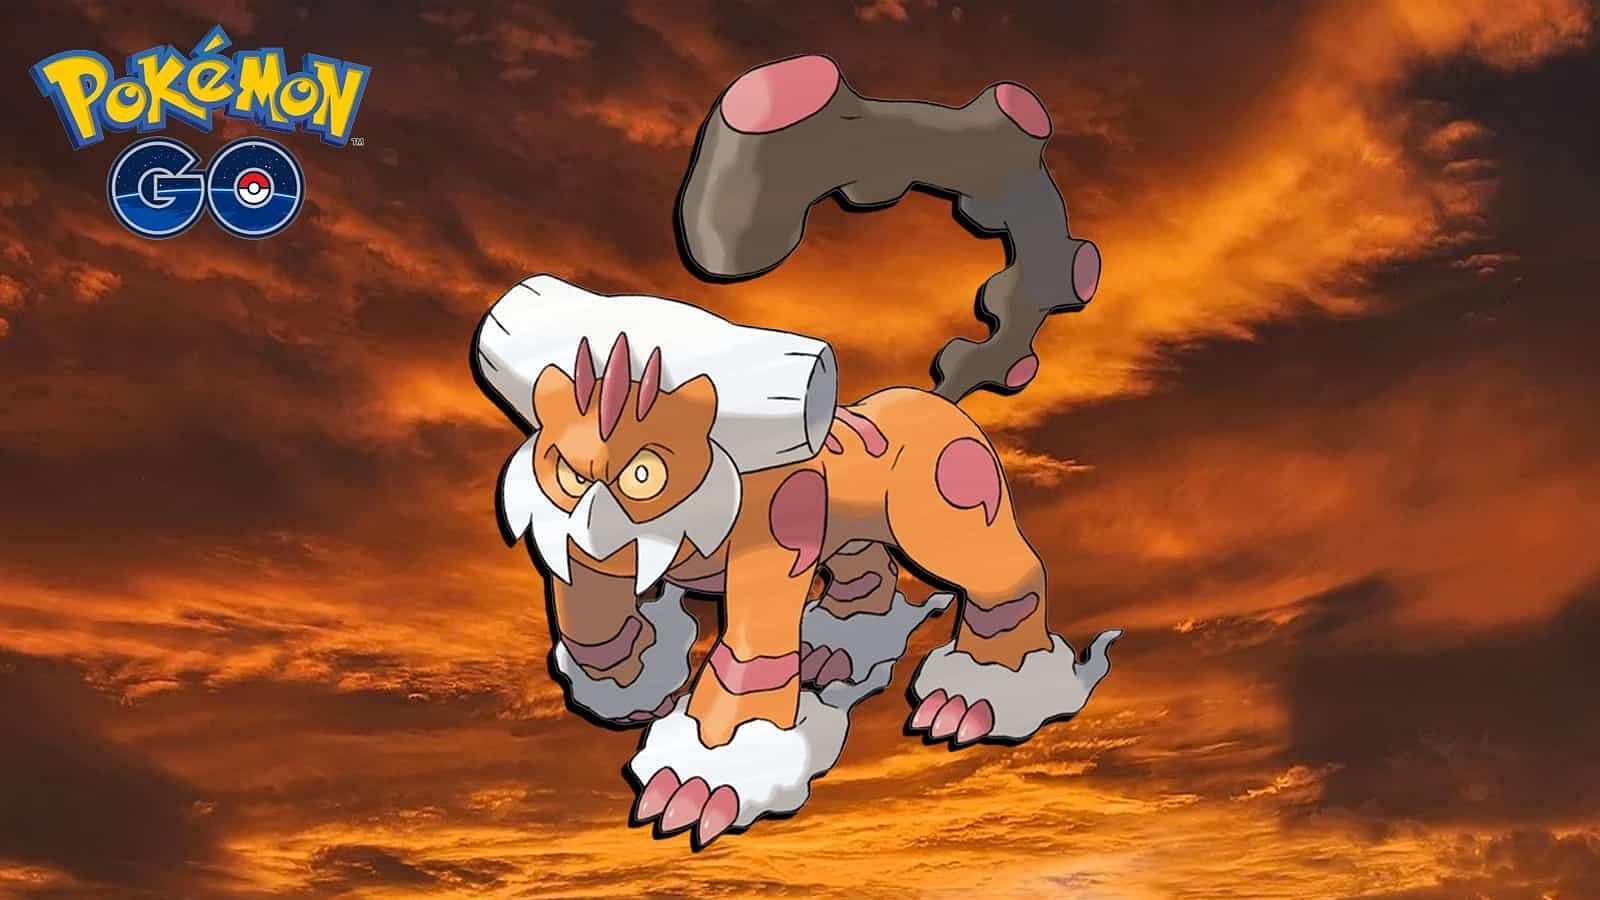 Landorus in its Therian Forme is one of the best counters for any Electric or Steel-type in Pokemon GO (Image via Niantic)